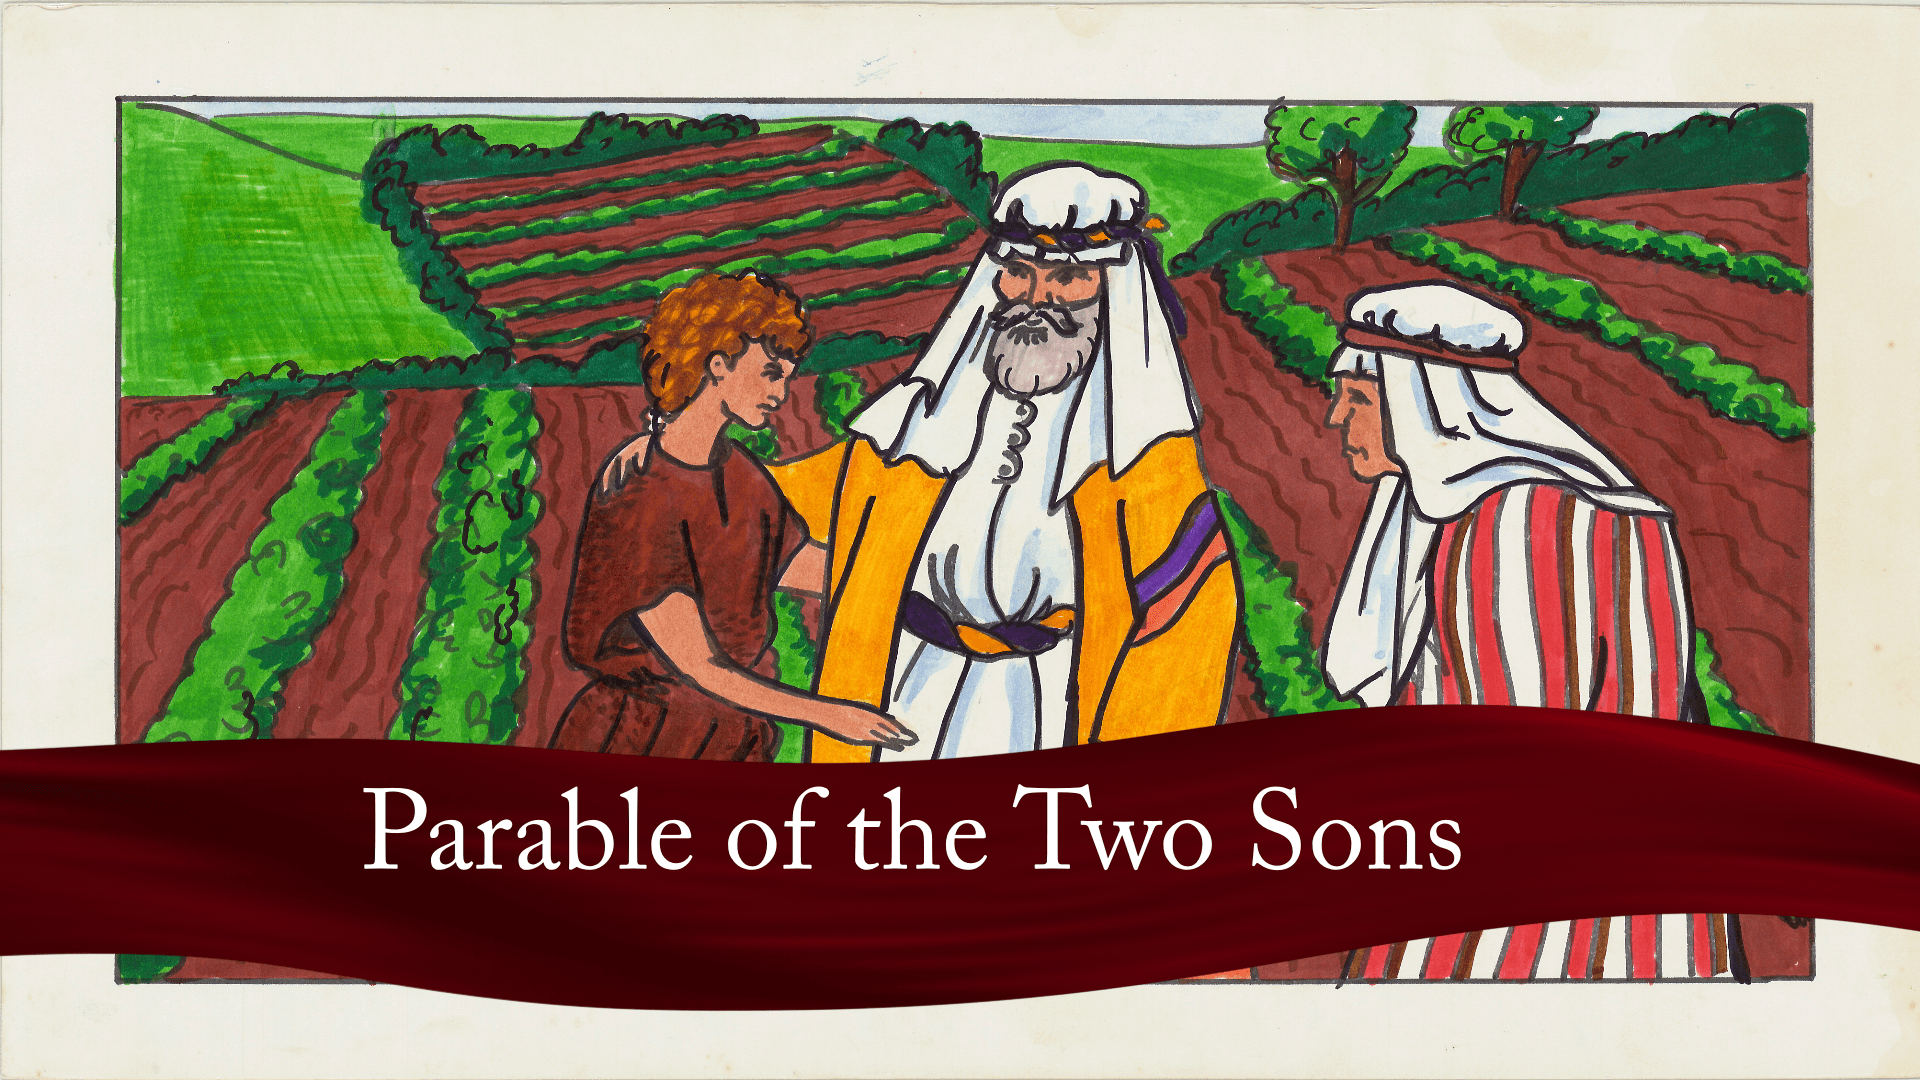 The Parable of Two Sons